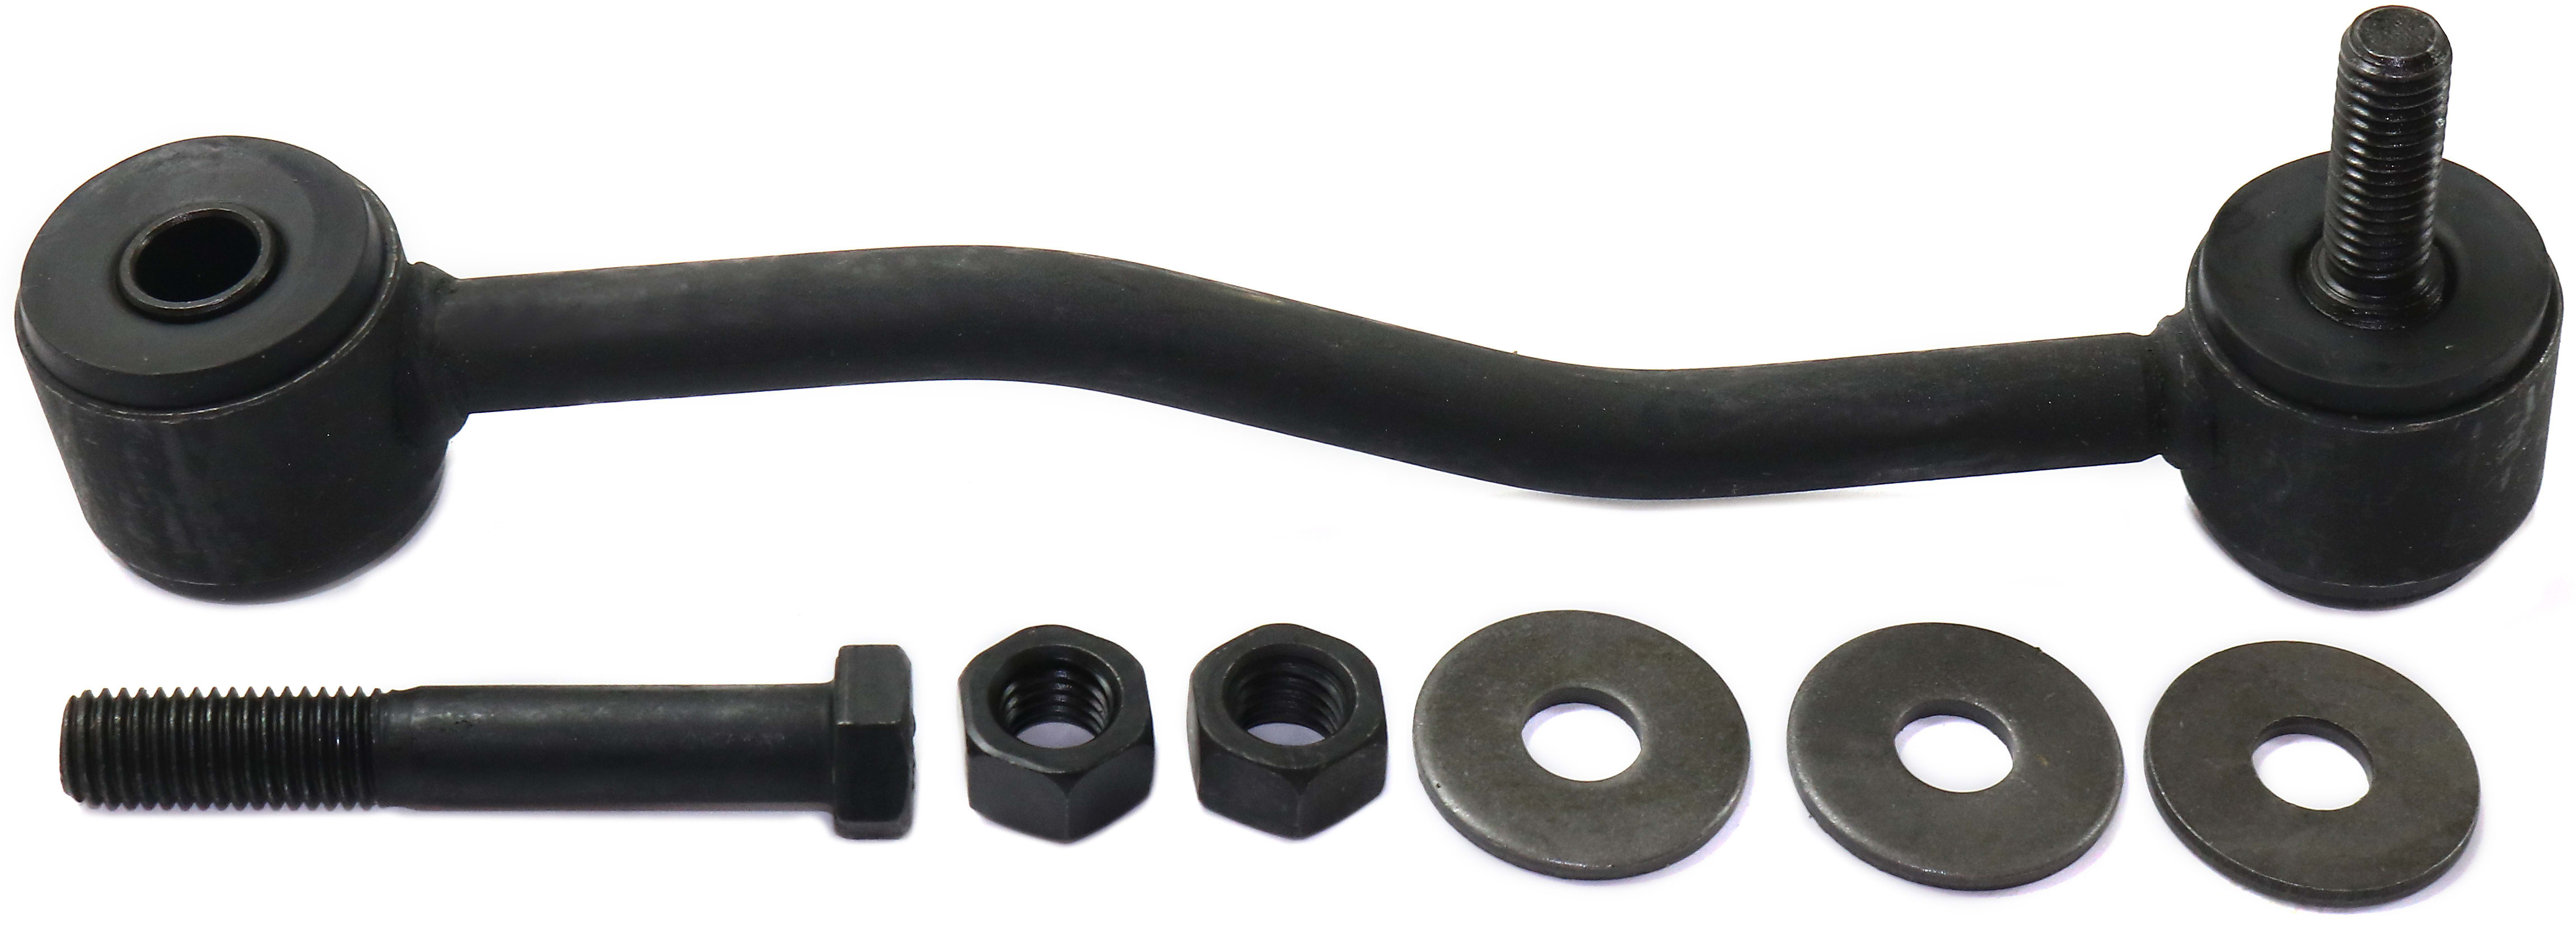 1999 Ford F-250 Super Duty Sway Bar Links from $15 | CarParts.com 1999 F250 Super Duty Sway Bar Links